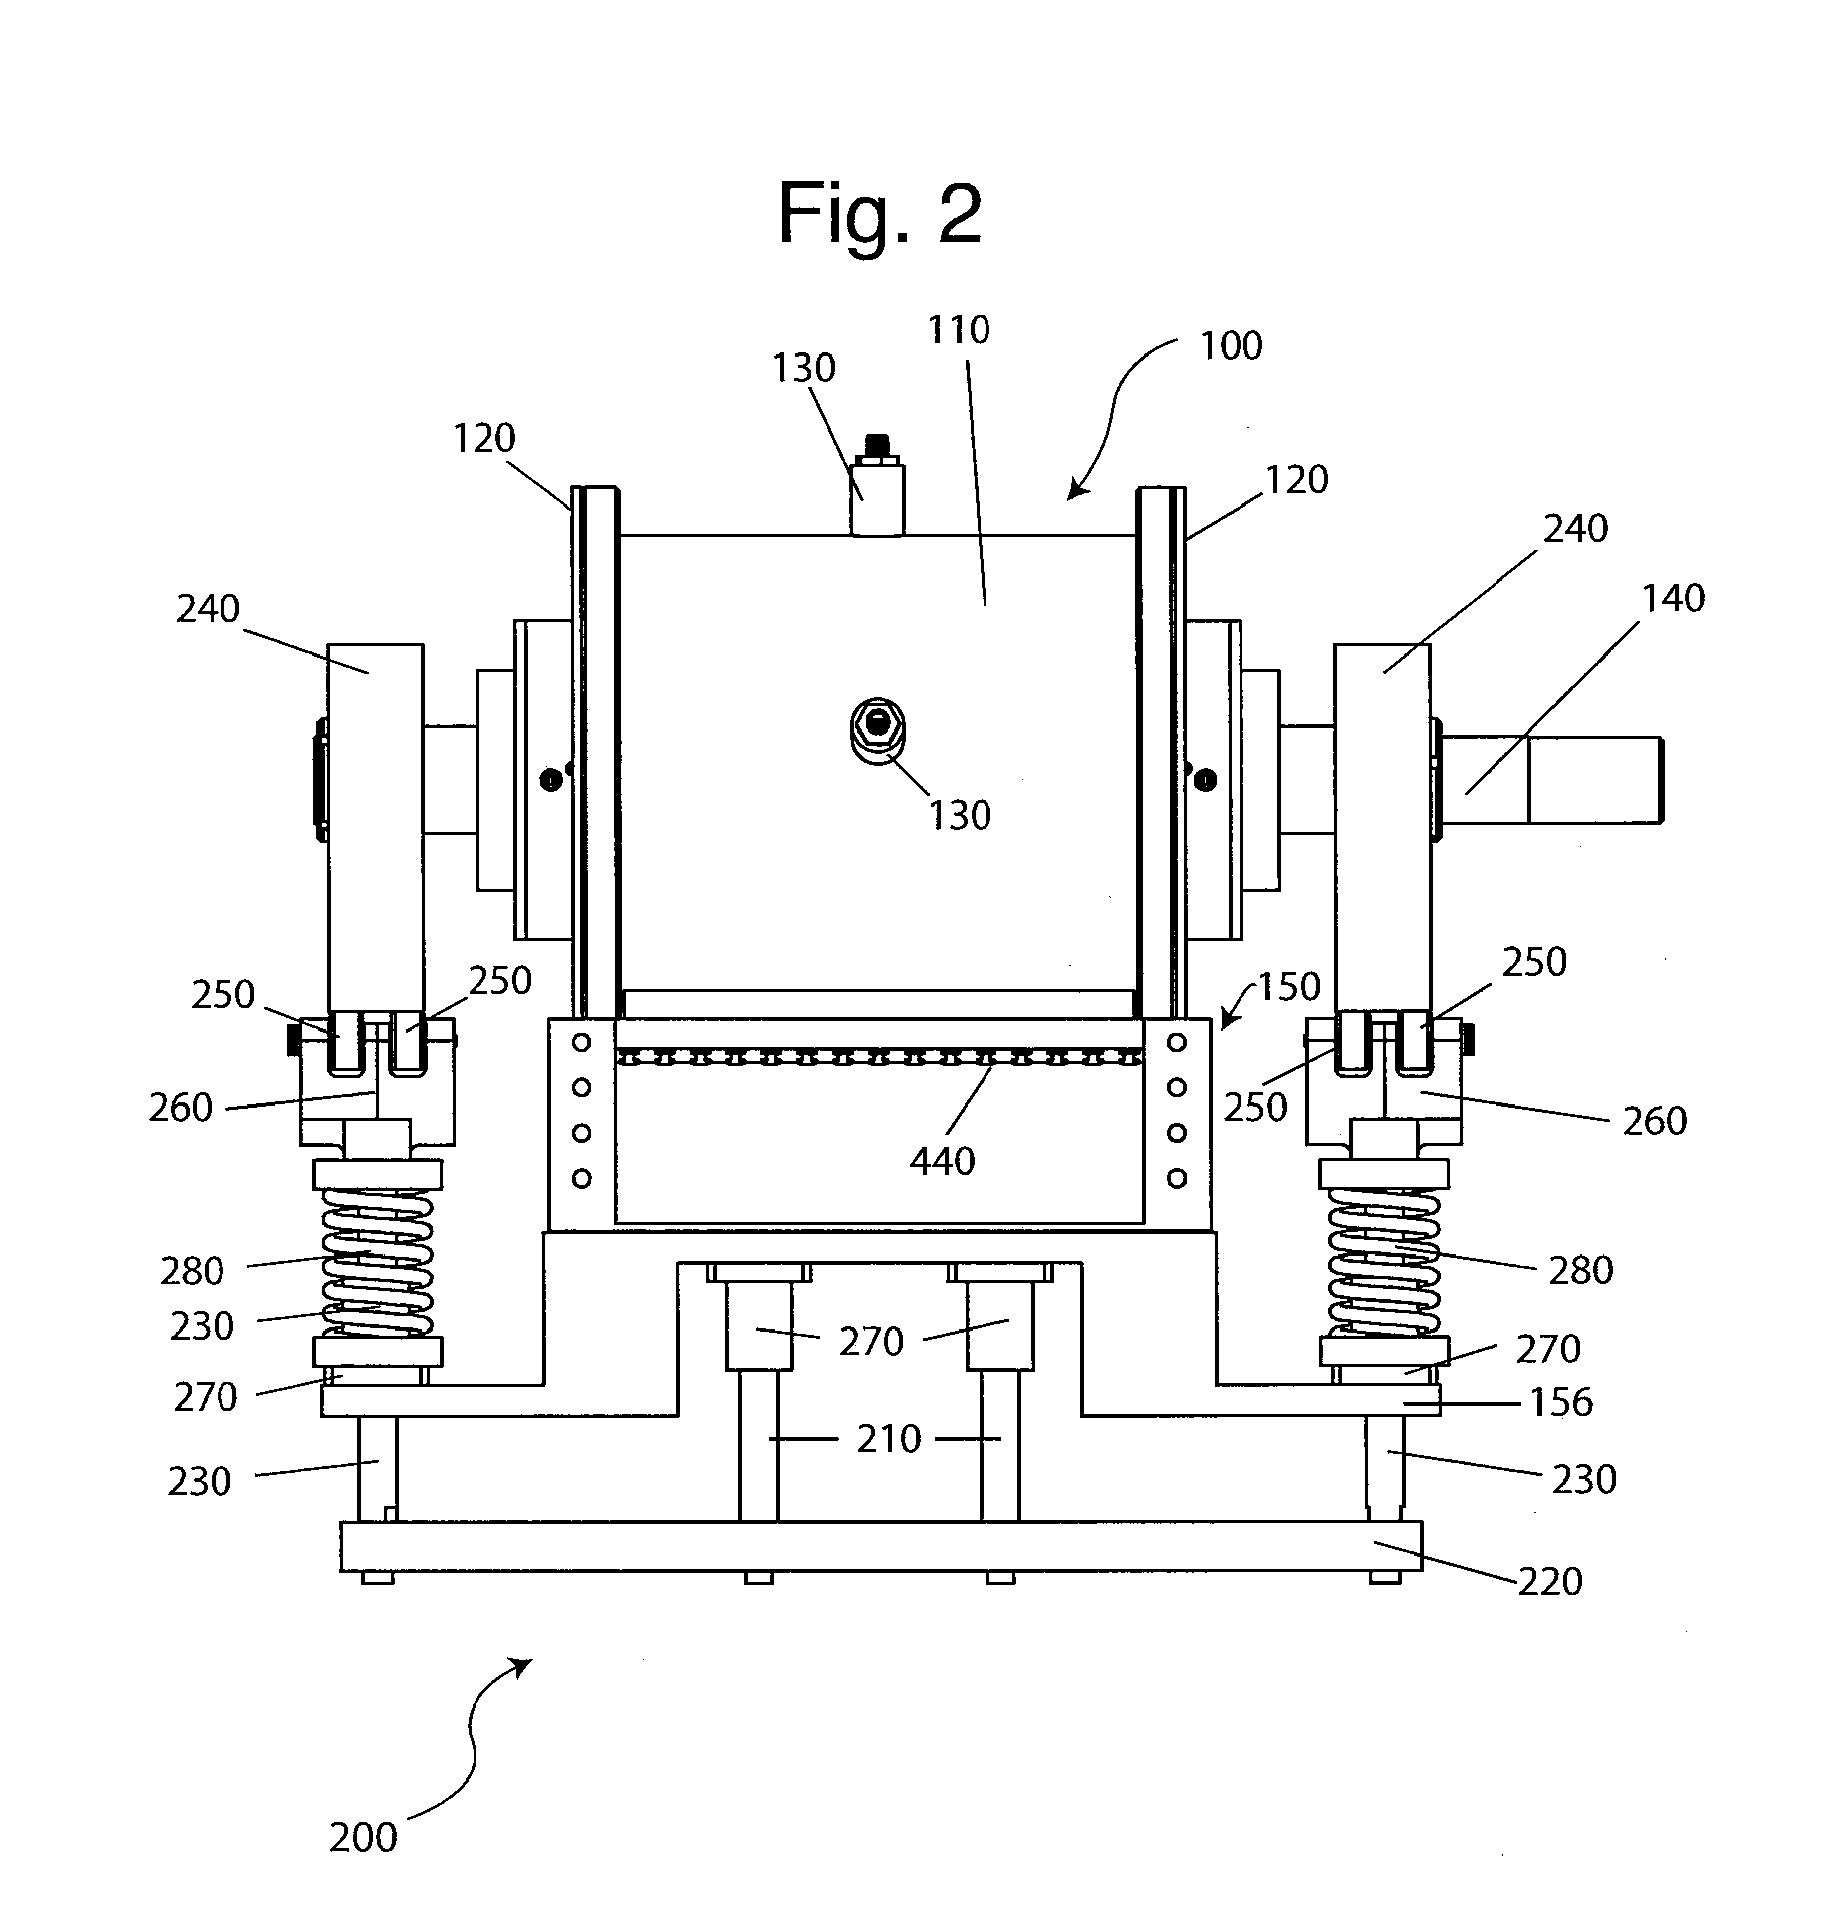 Compressor with liquid injection cooling